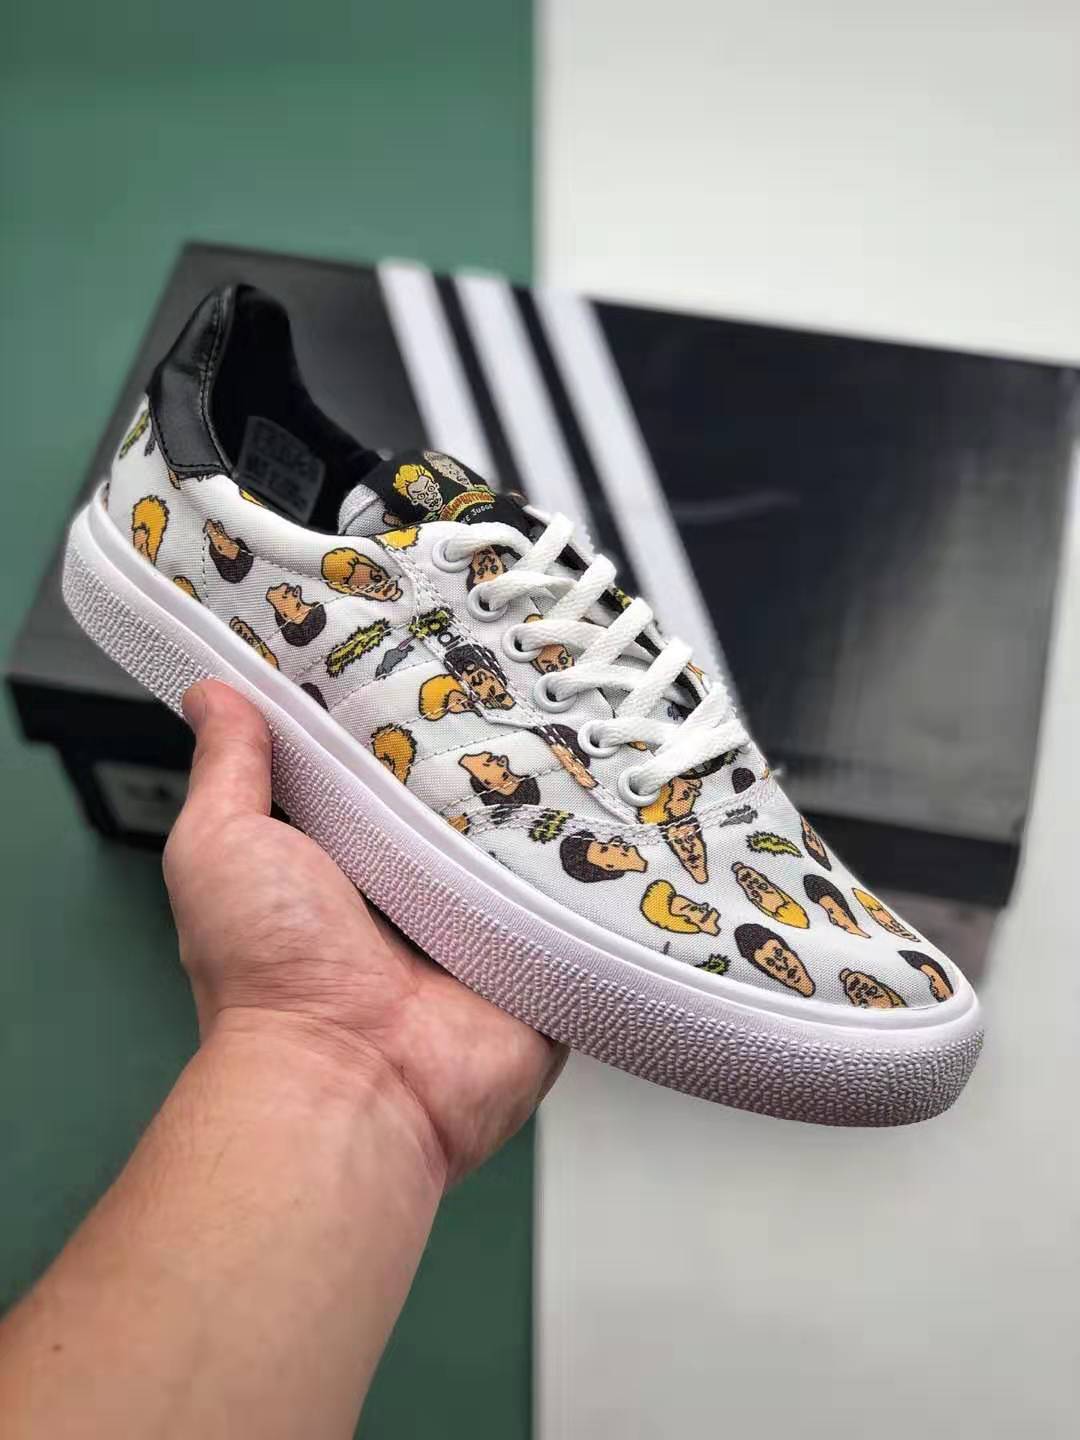 Adidas Beavis and Butthead x 3MC Vulc Cloud White F35088 | Limited Edition Collaboration Footwear